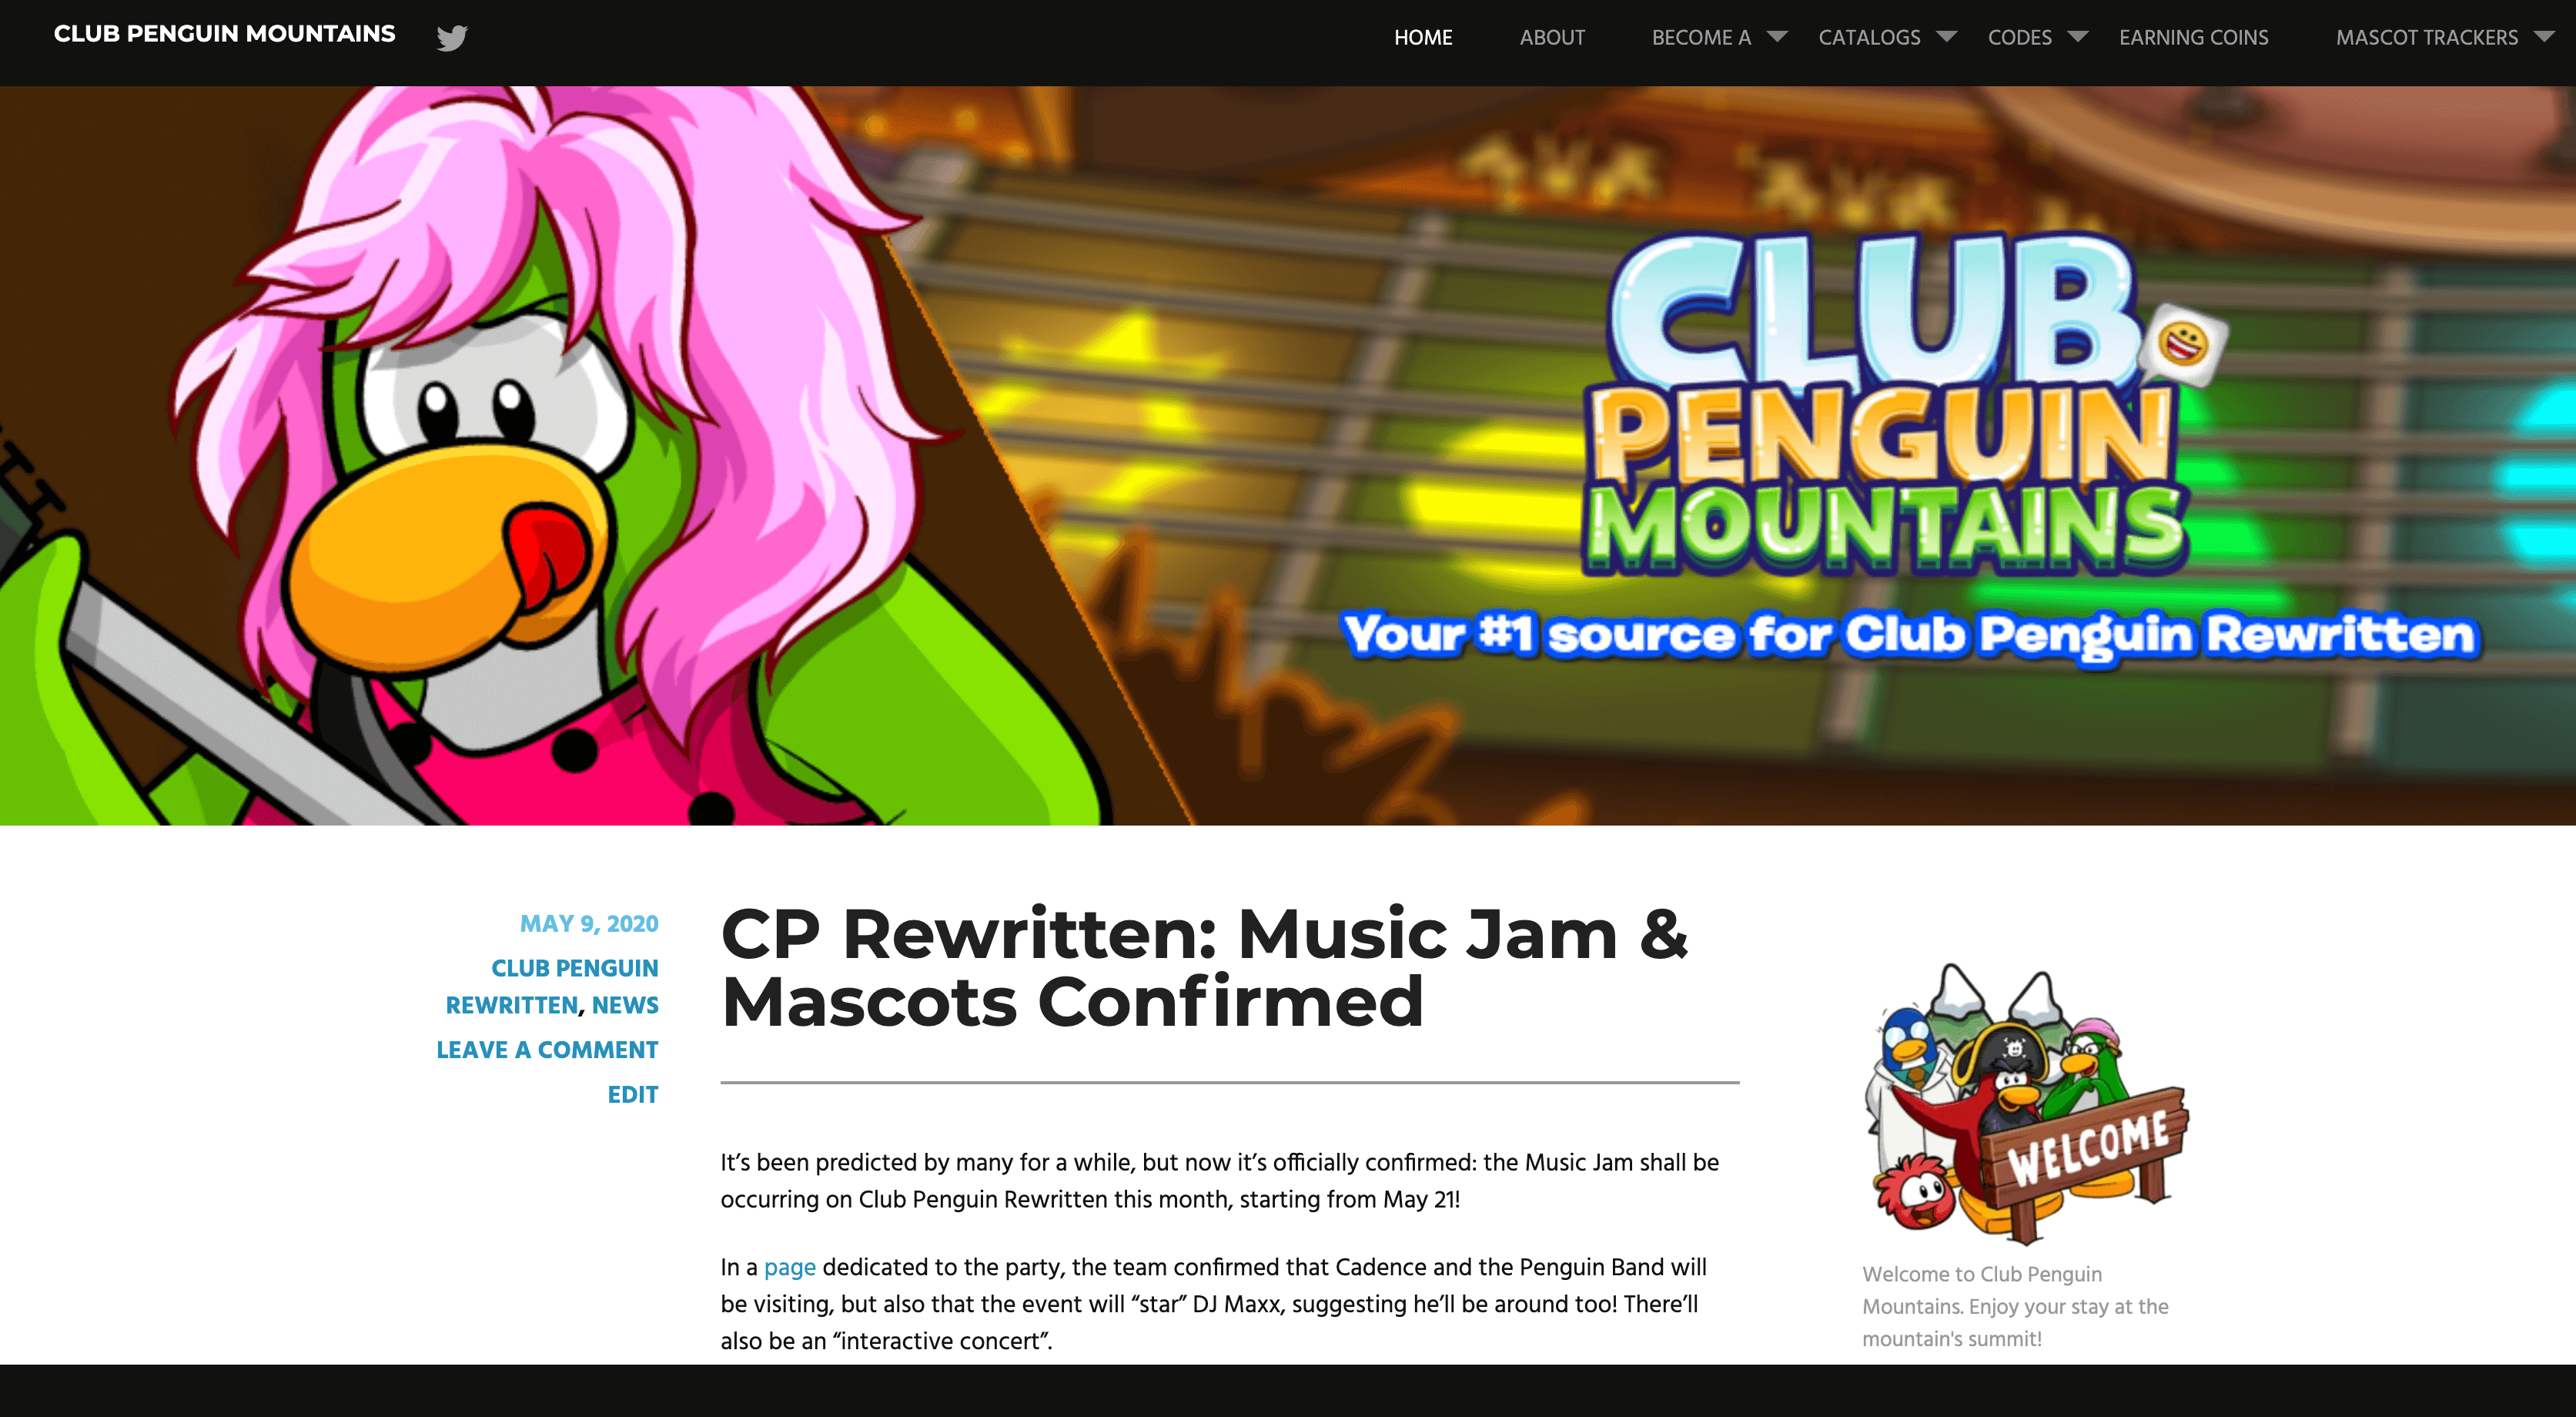 Club Penguin Mountains – Your #1 source for Club Penguin, with news,  guides, cheats, mascot trackers & more!